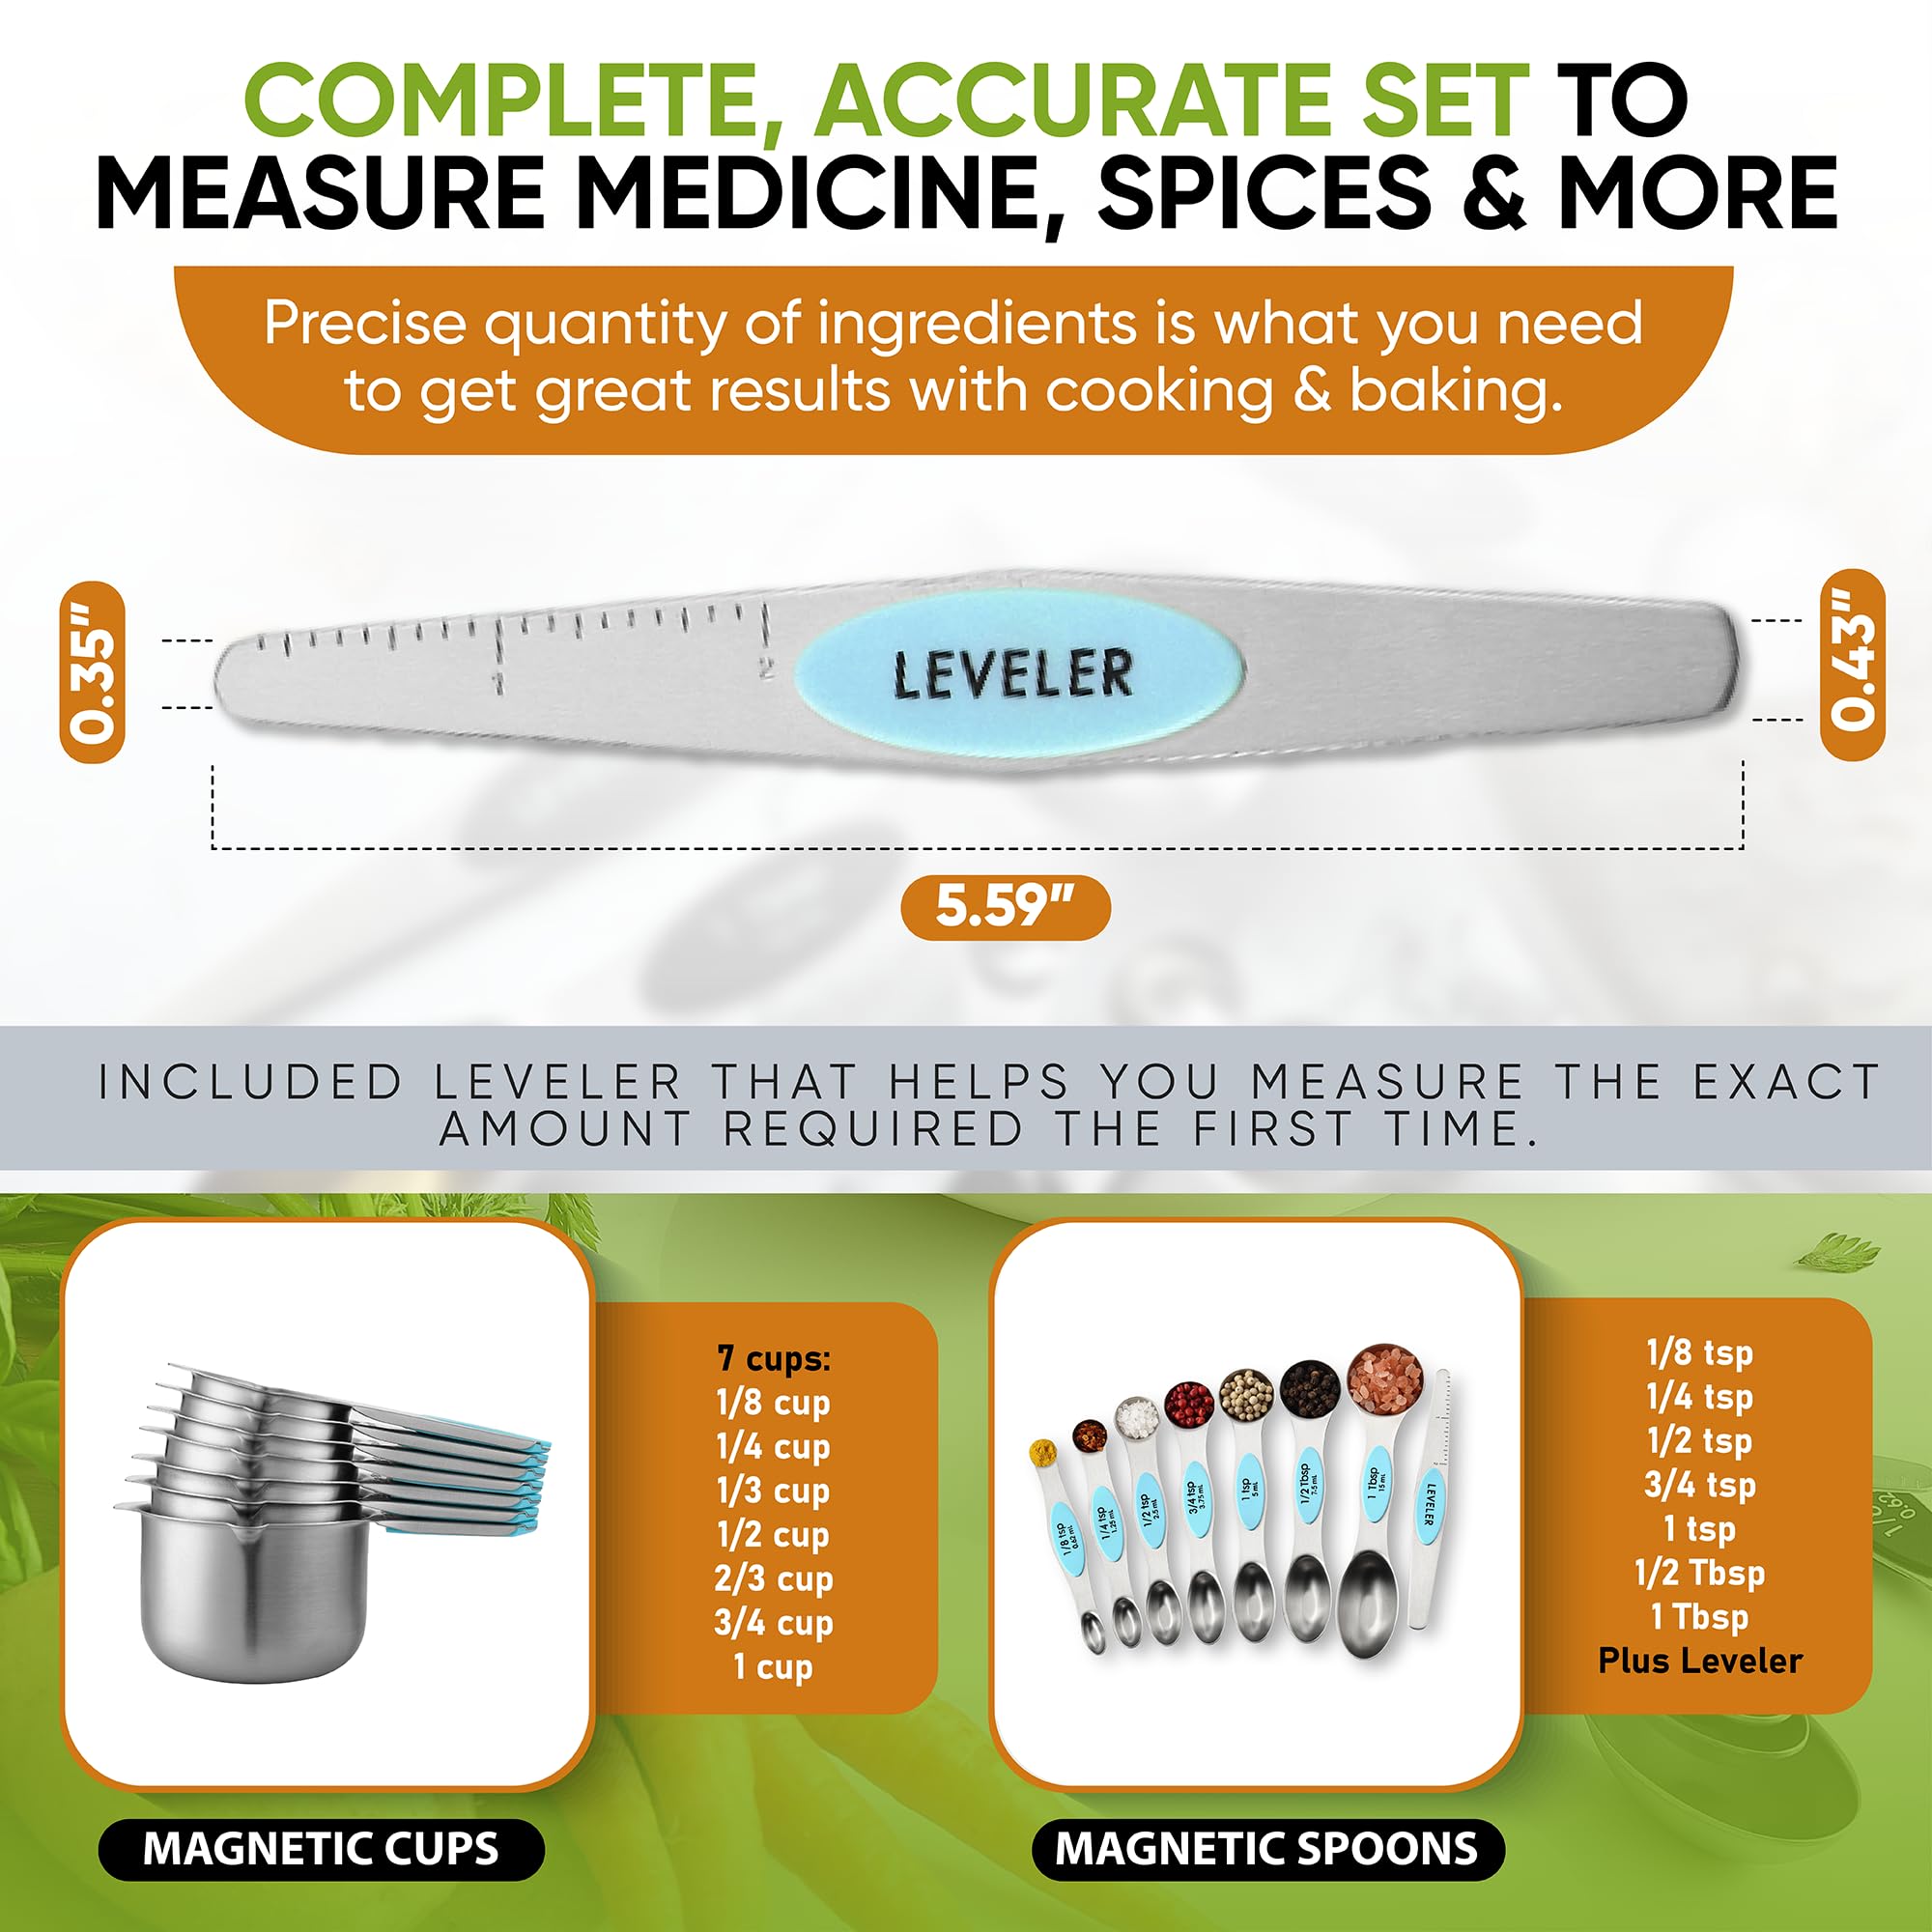 Spring Chef Magnetic Measuring Cups & Spoons Set (Patent Pending), Strong Magnets, Heavy Duty Stainless Steel Fits in Spice Jars for Baking & Cooking, BPA Free, Round Set of 15 with Leveler, Aqua Sky